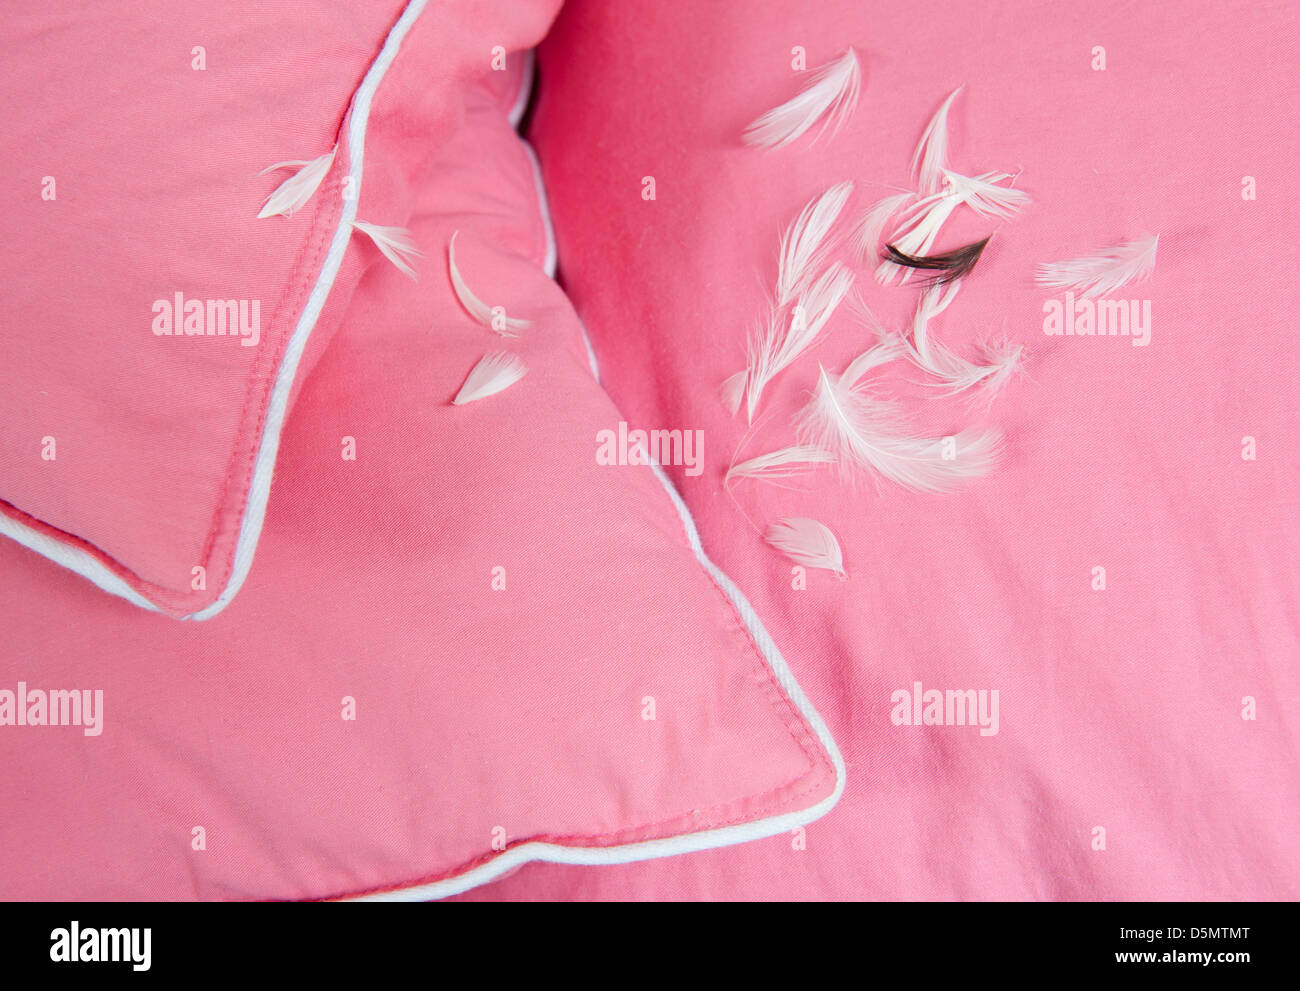 feathers leaking out of pink cotton pillow Stock Photo